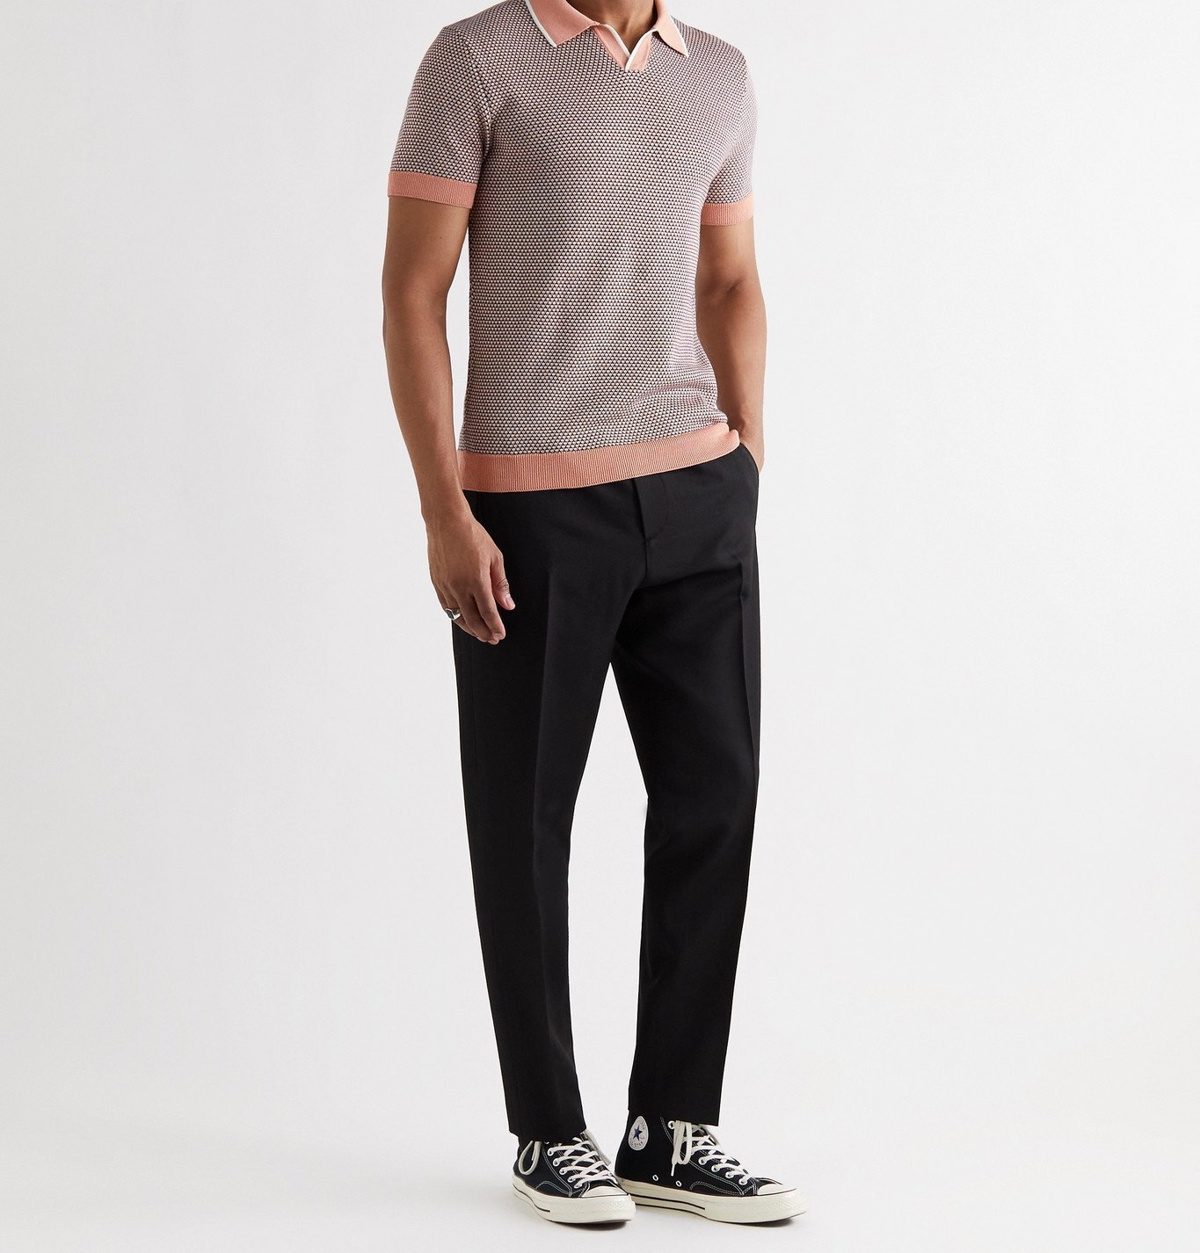 MR P. Slim-Fit Knitted Organic Cotton T-Shirt for Men